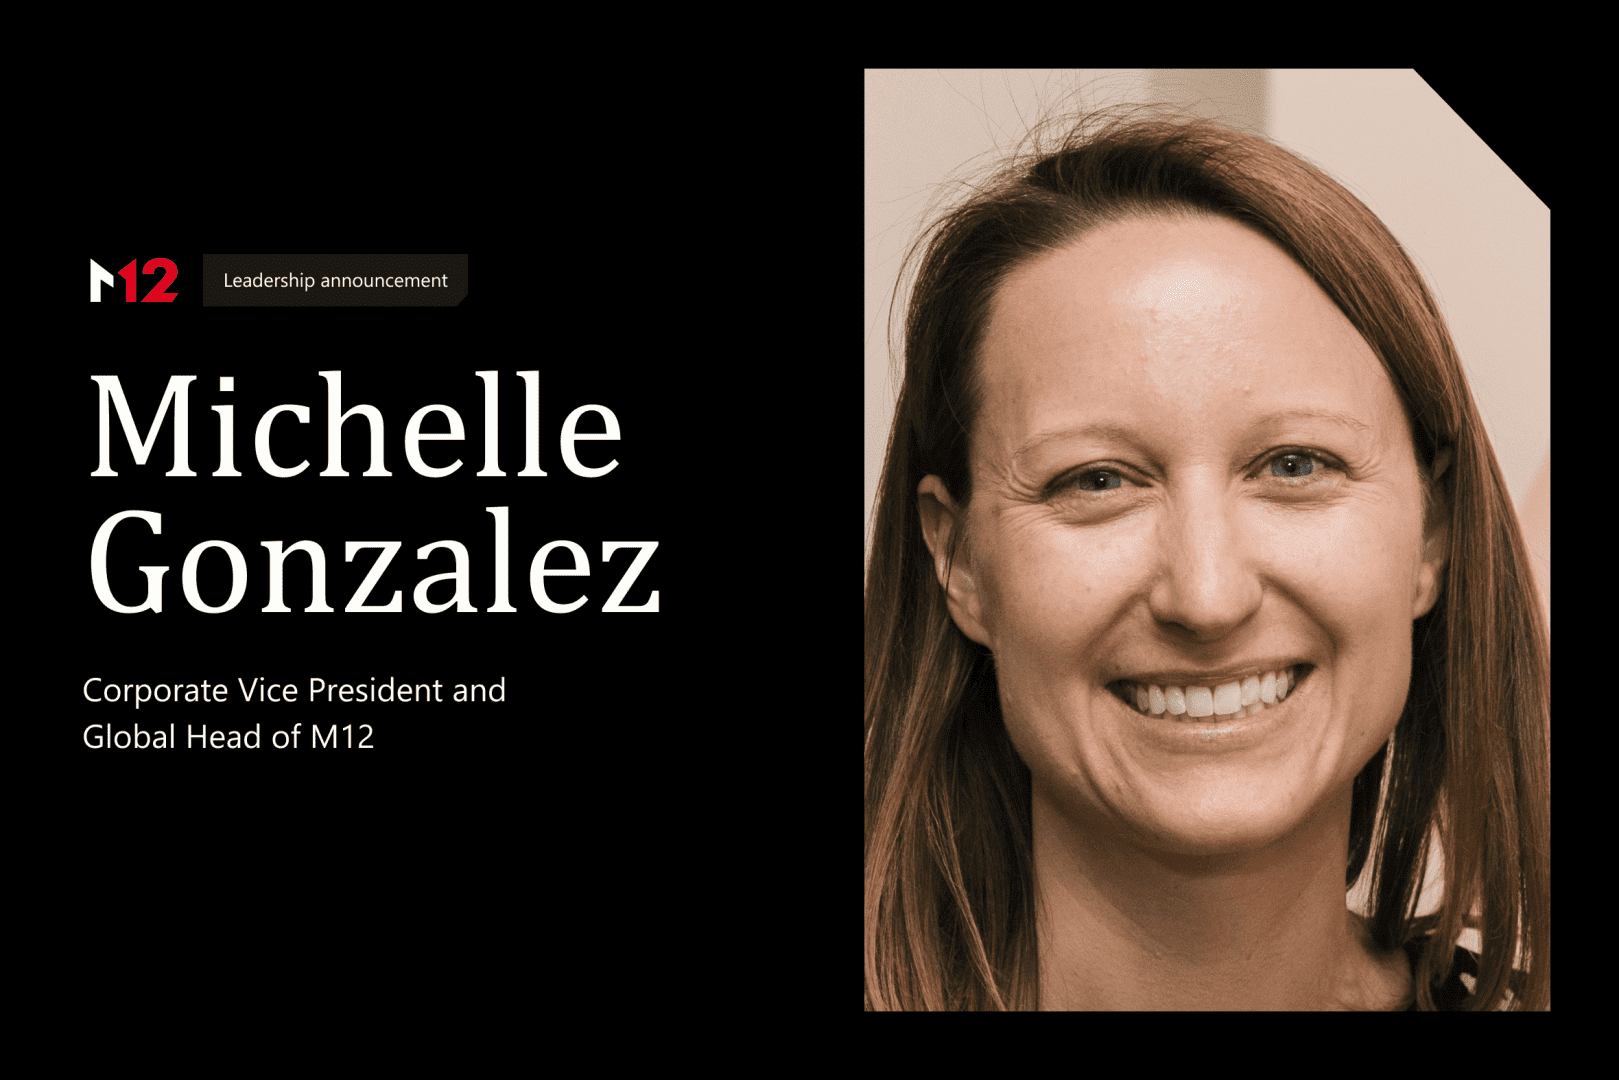 Photo of Michelle Gonzalez, Corporate Vice President and Global Head of M12